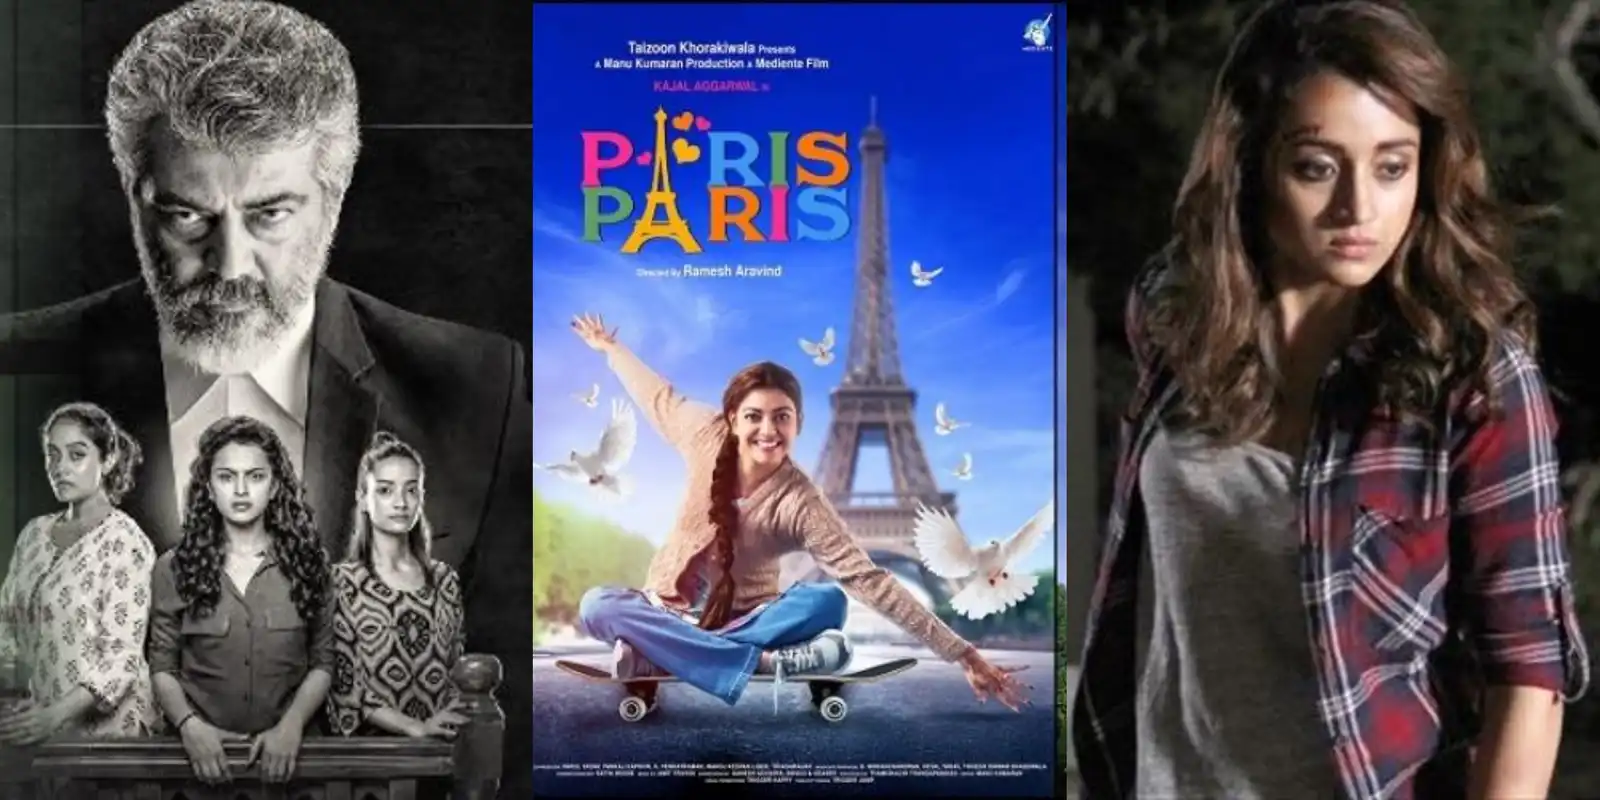 5 South Remakes Of Popular Bollywood Films That Will Release In 2019